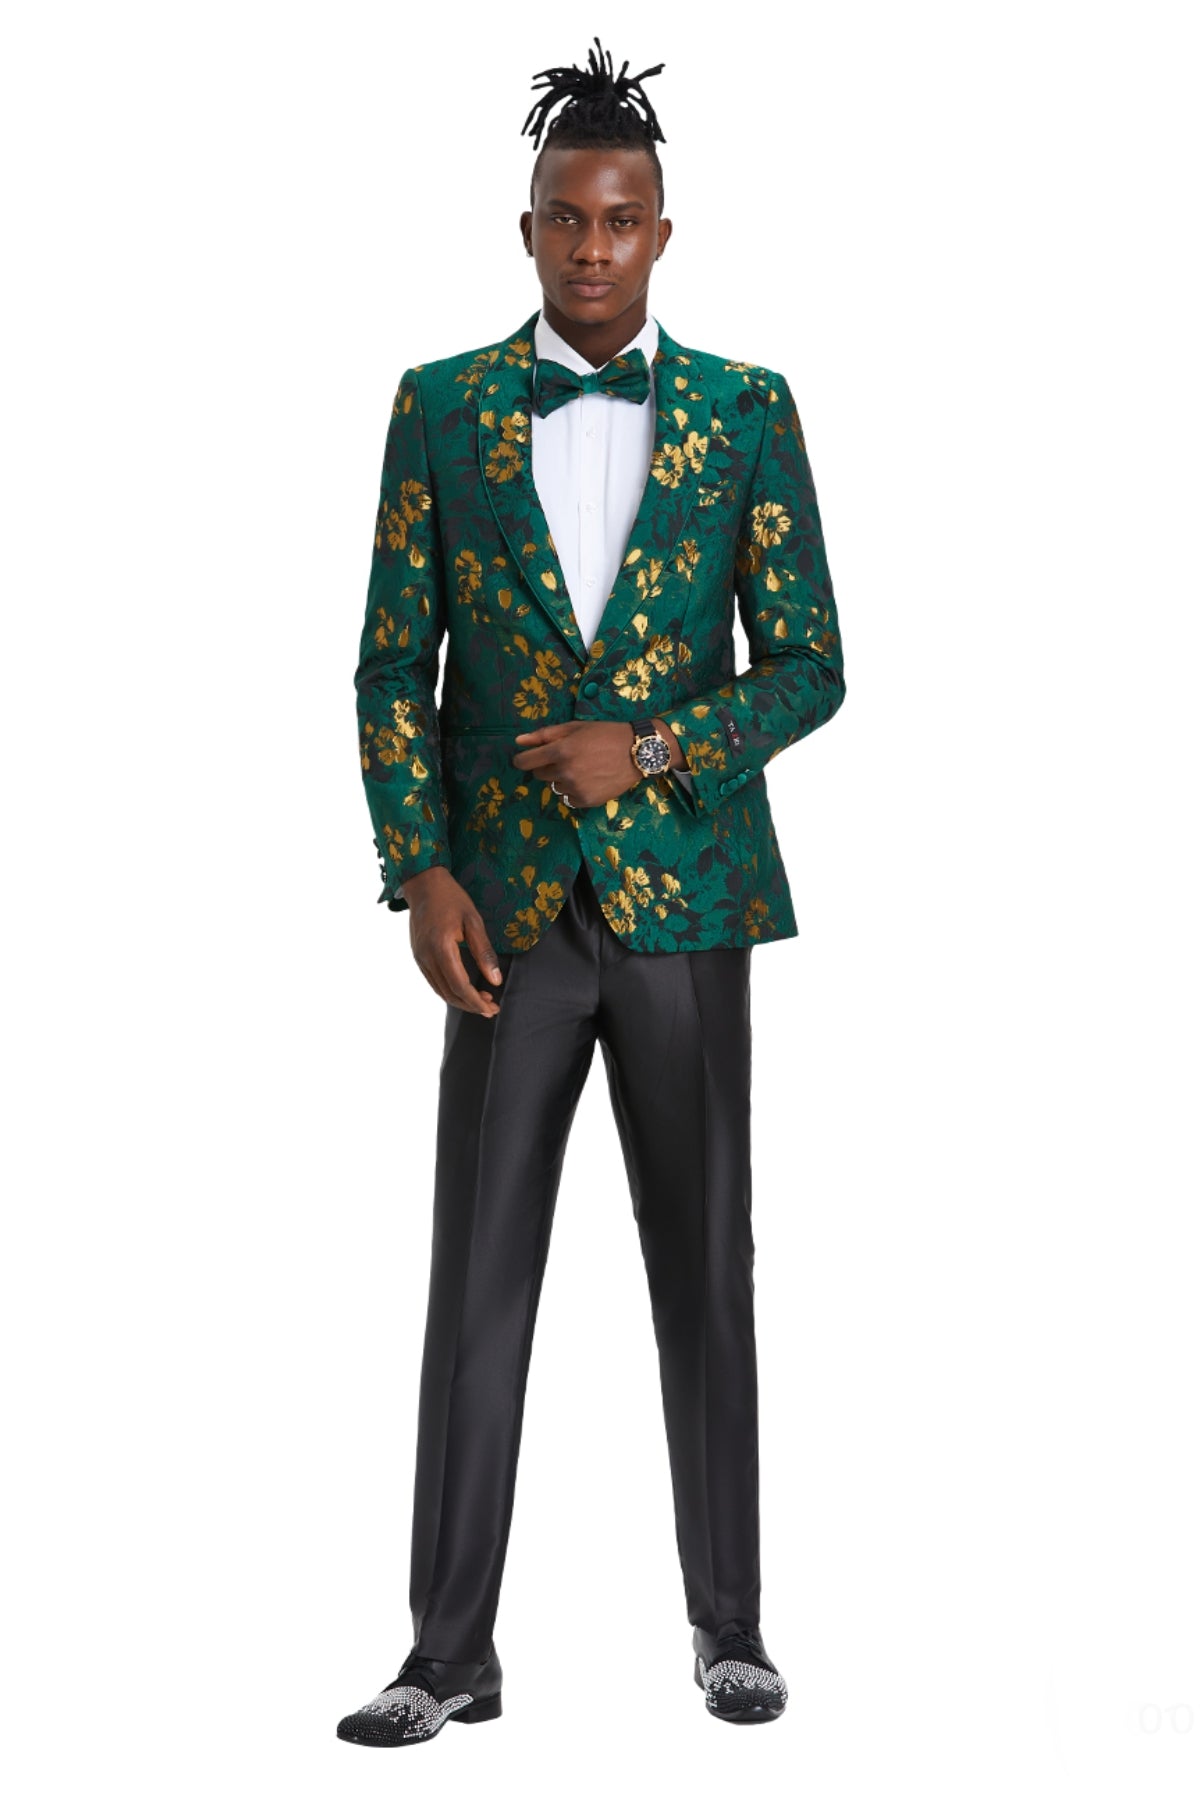 KCT Menswear's Emerald Green & Gold Floral Prom Blazer and Matching Bowtie - Elegant Formalwear for Prom 2023